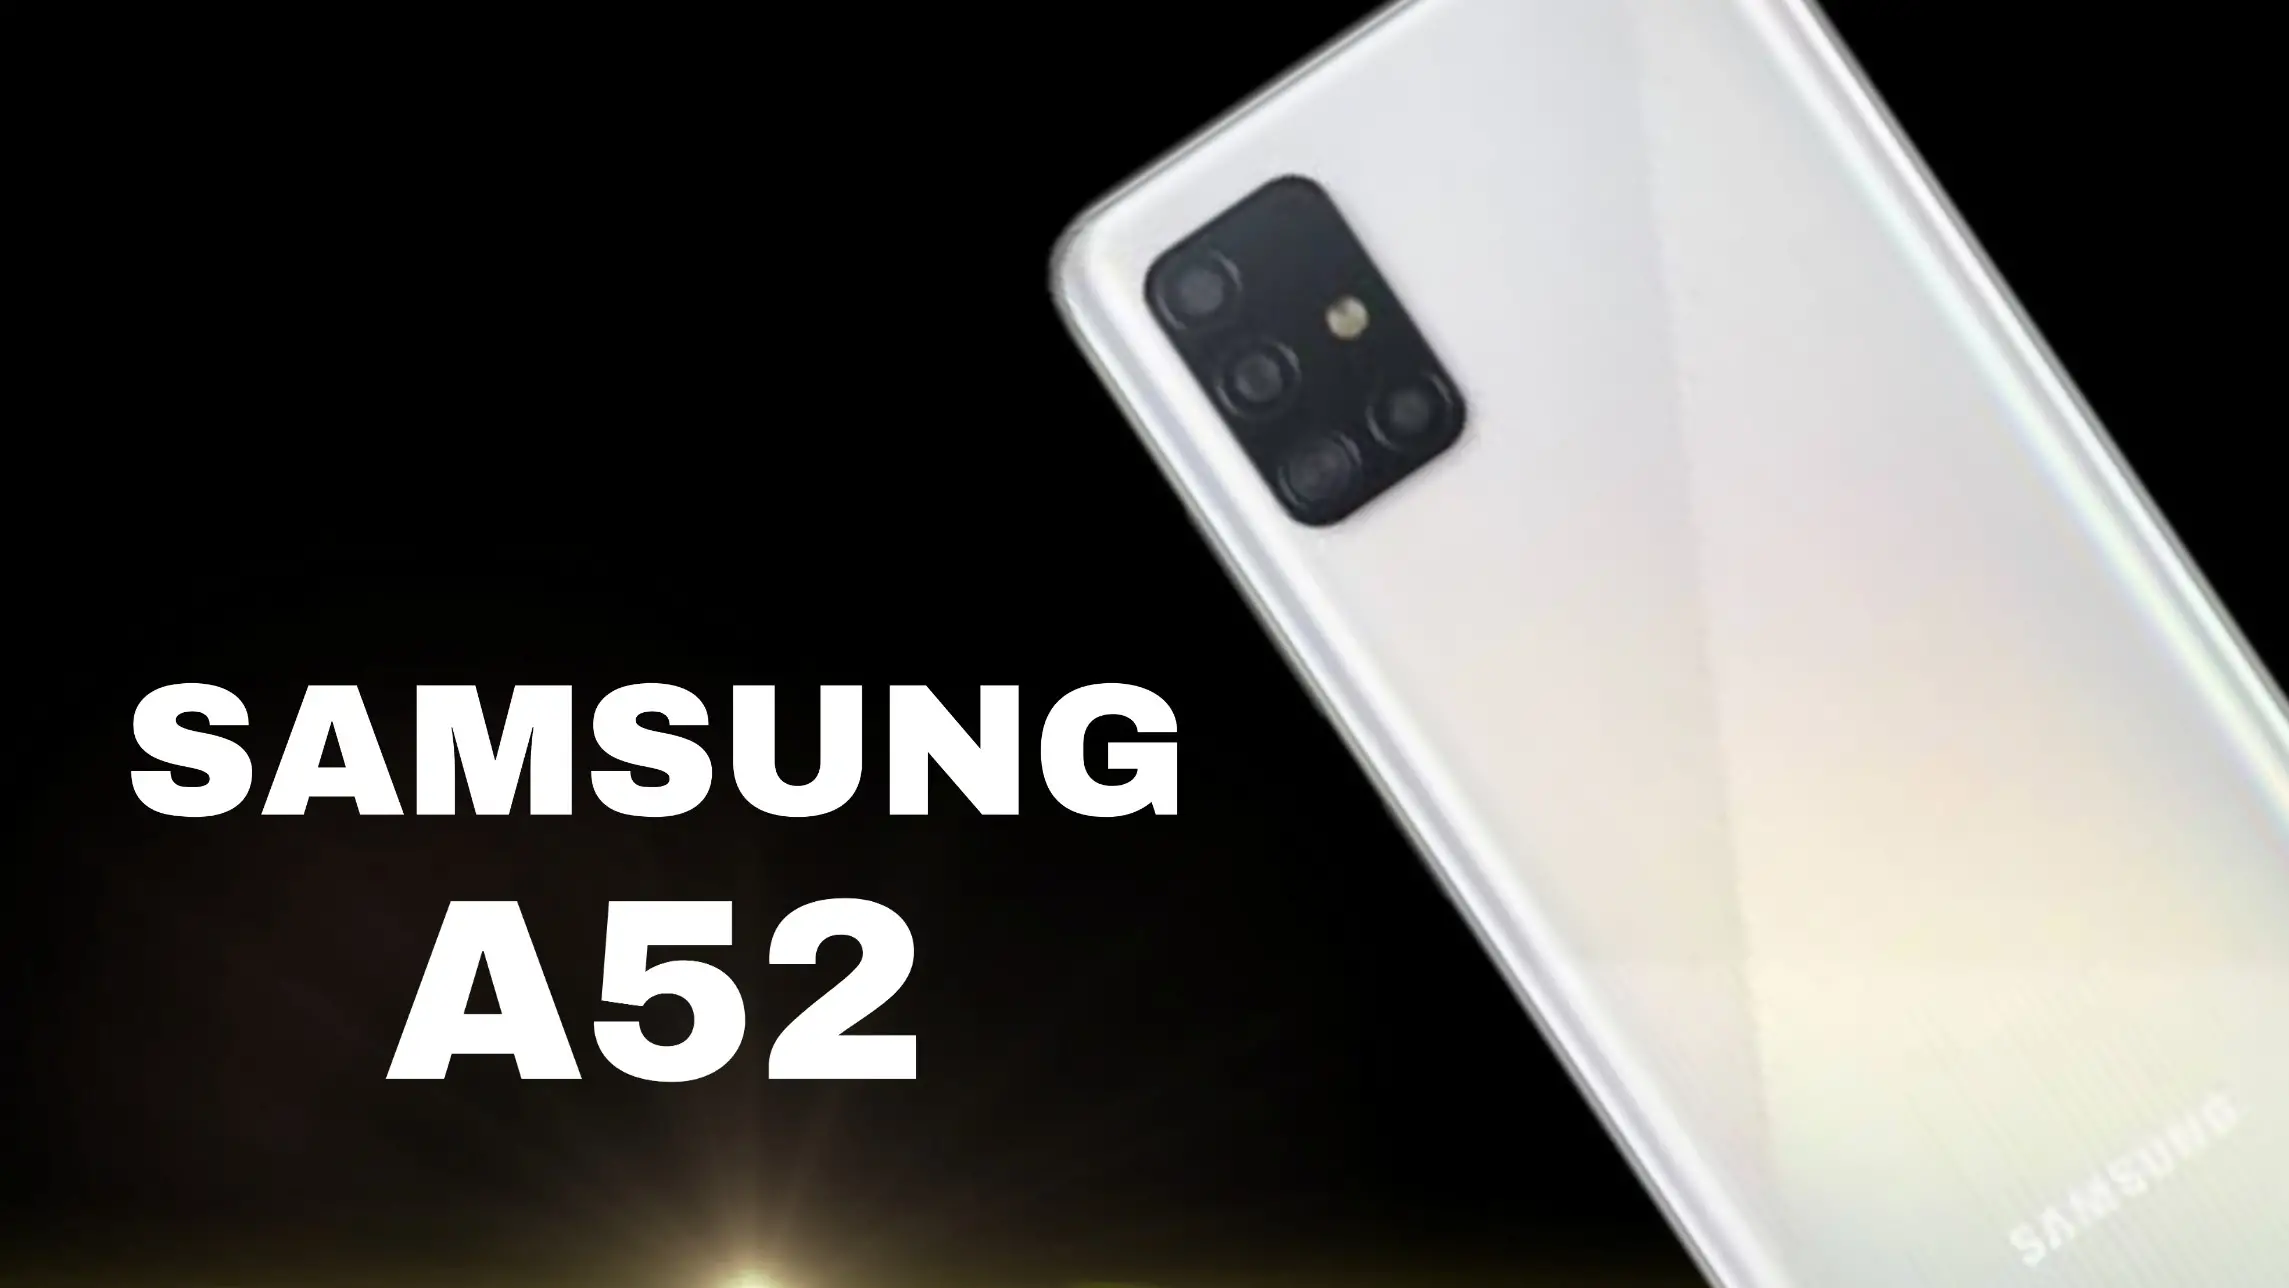 Samsung Galaxy A52 5G about to launch in India soon; production started